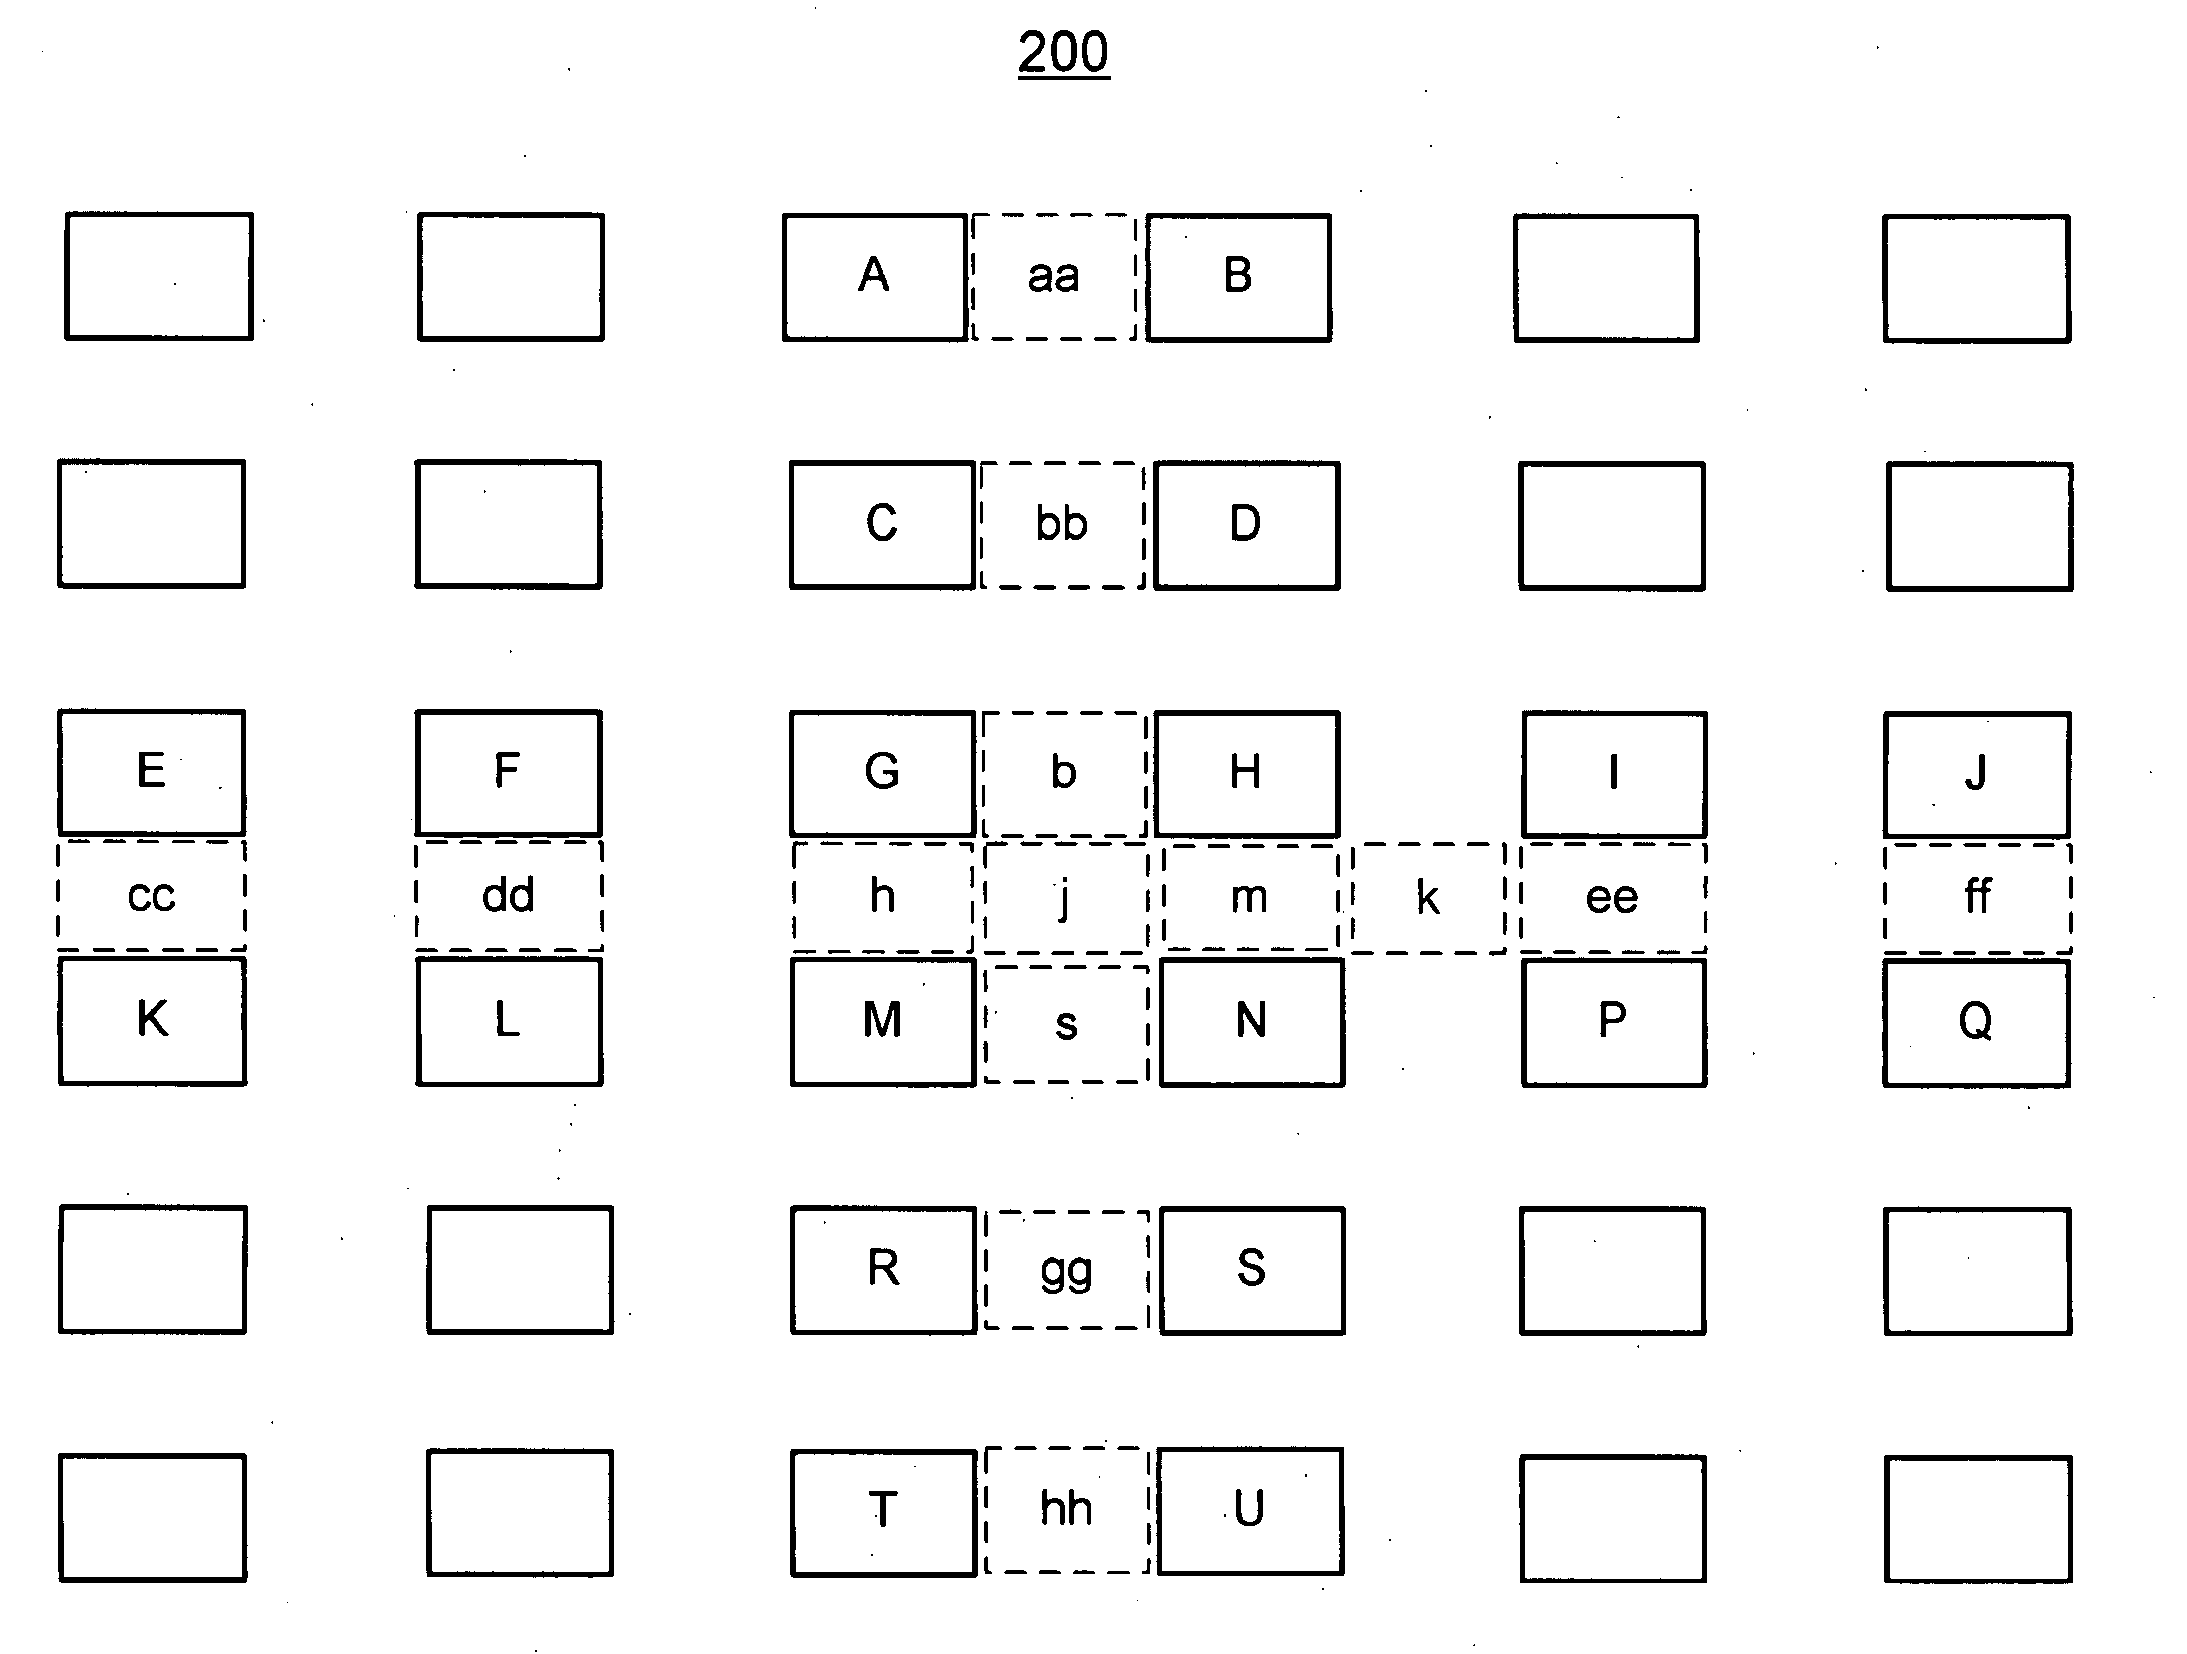 Systems and methods for accelerating sub-pixel interpolation in video processing applications